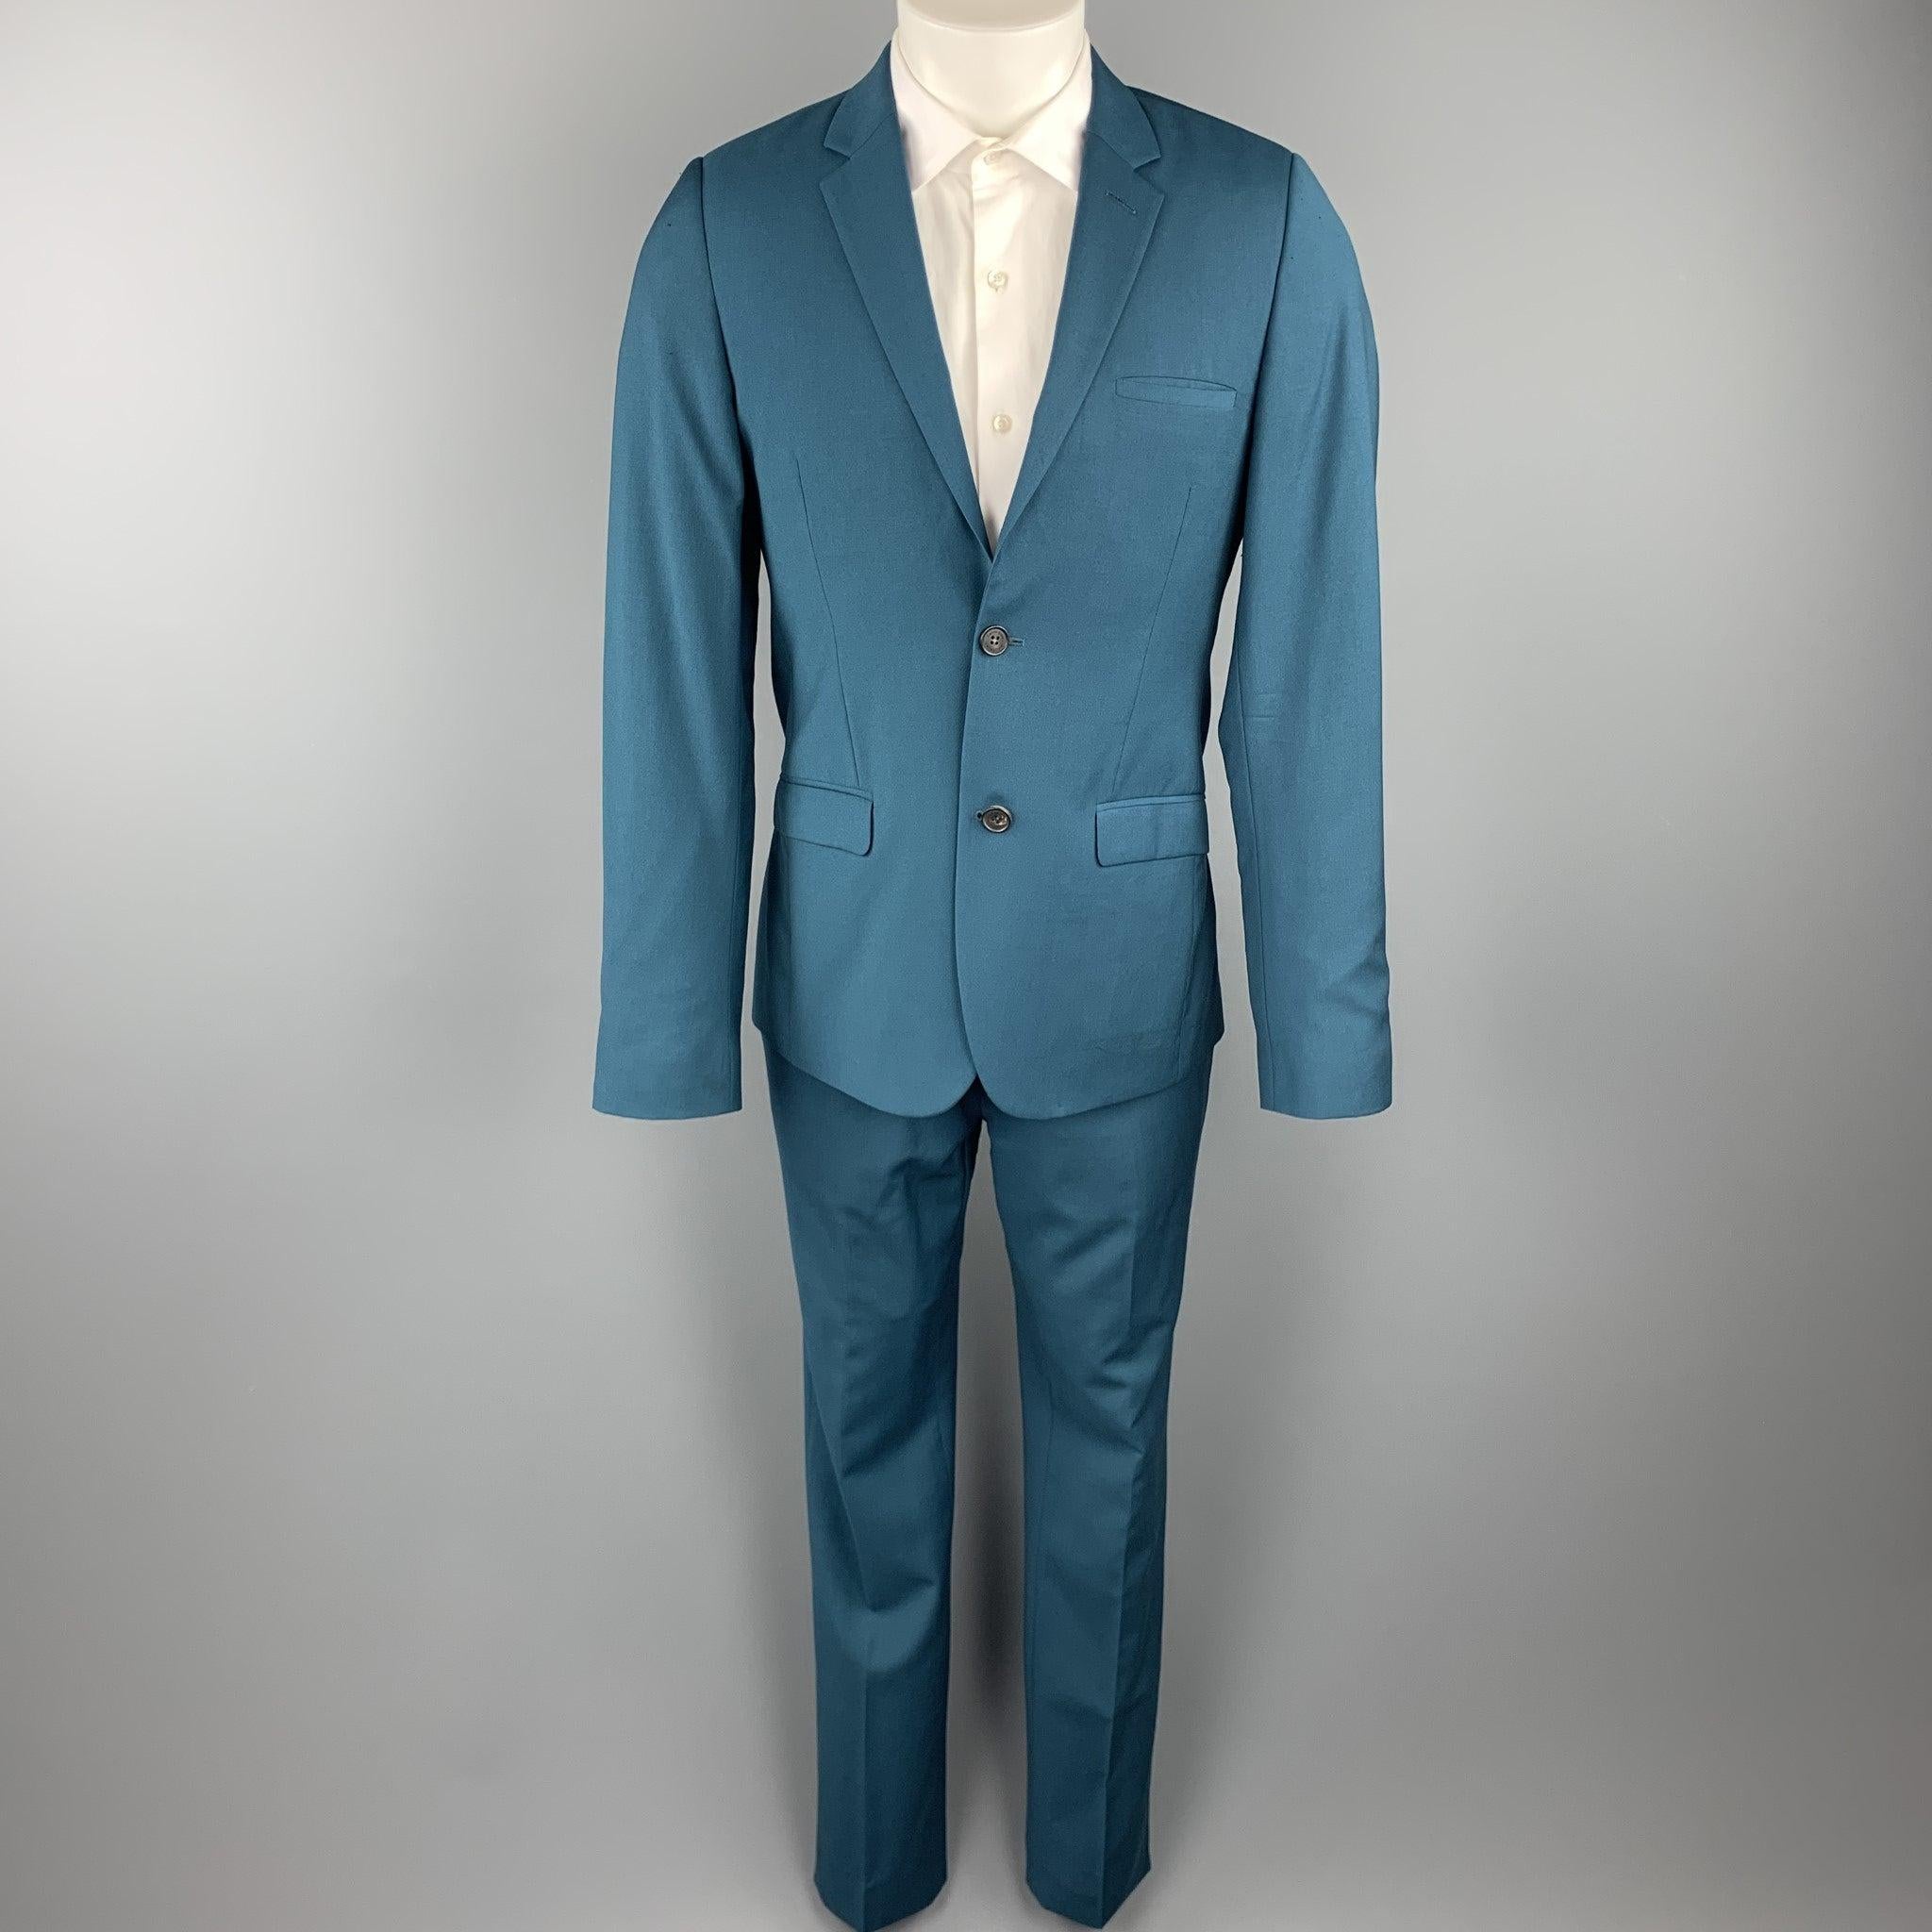 CALVIN KLEIN COLLECTION
suit comes in a teal wool with a viscose monogram liner and includes a single breasted, two button sport coat with notch lapel and matching flat front trousers.
Excellent Pre-Owned Condition. 

Marked:   46/36 

Measurements: